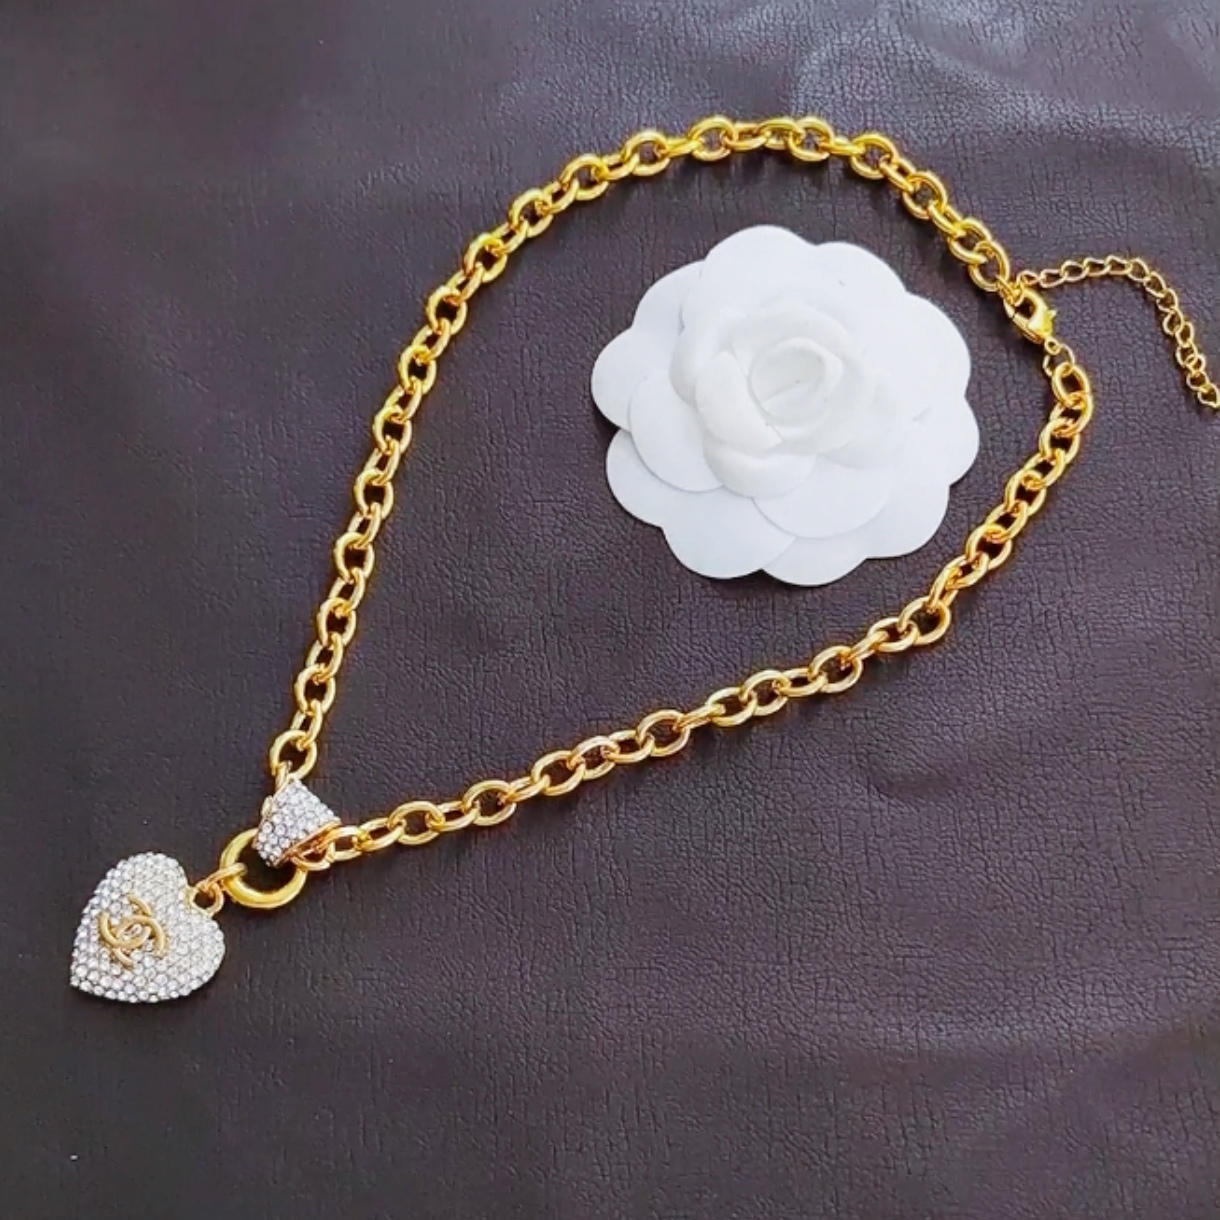 Chanel heart necklace 106387